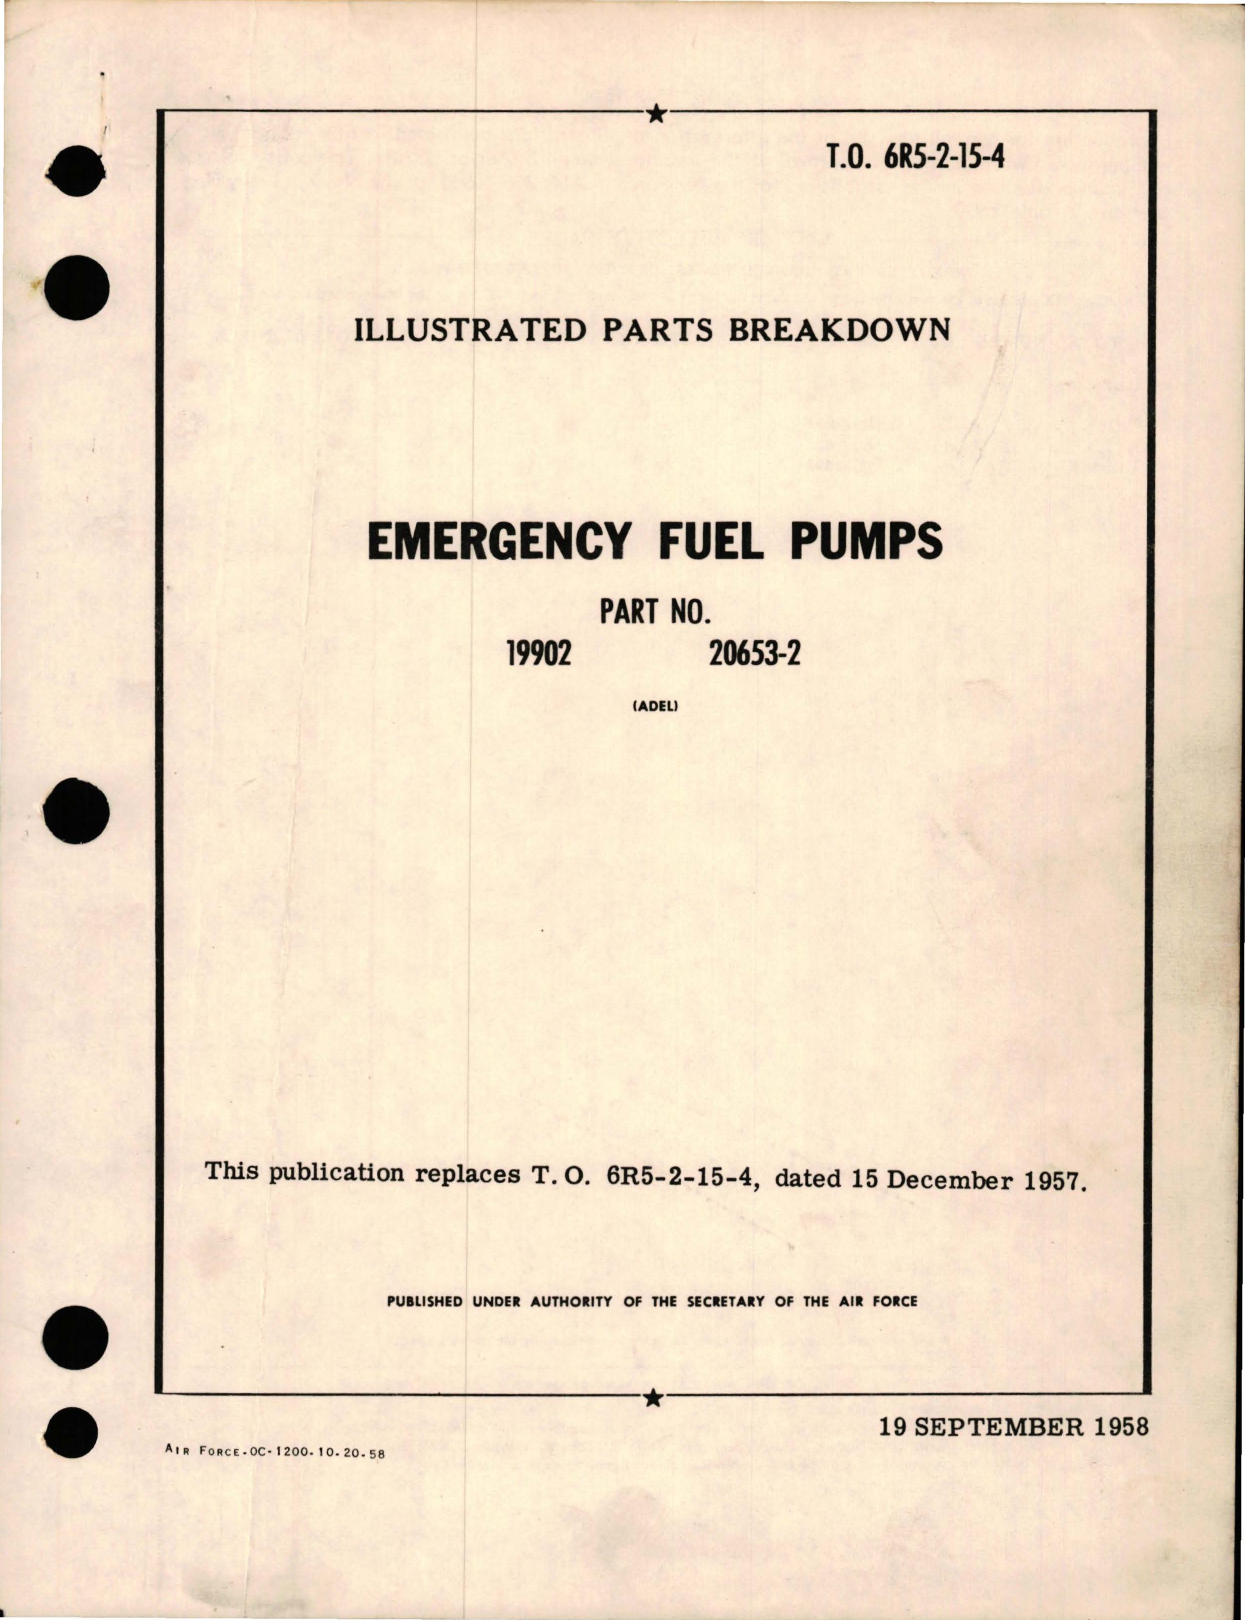 Sample page 1 from AirCorps Library document: Illustrated Parts Breakdown for Emergency Fuel Pumps - Parts 19902 and 20653-2 